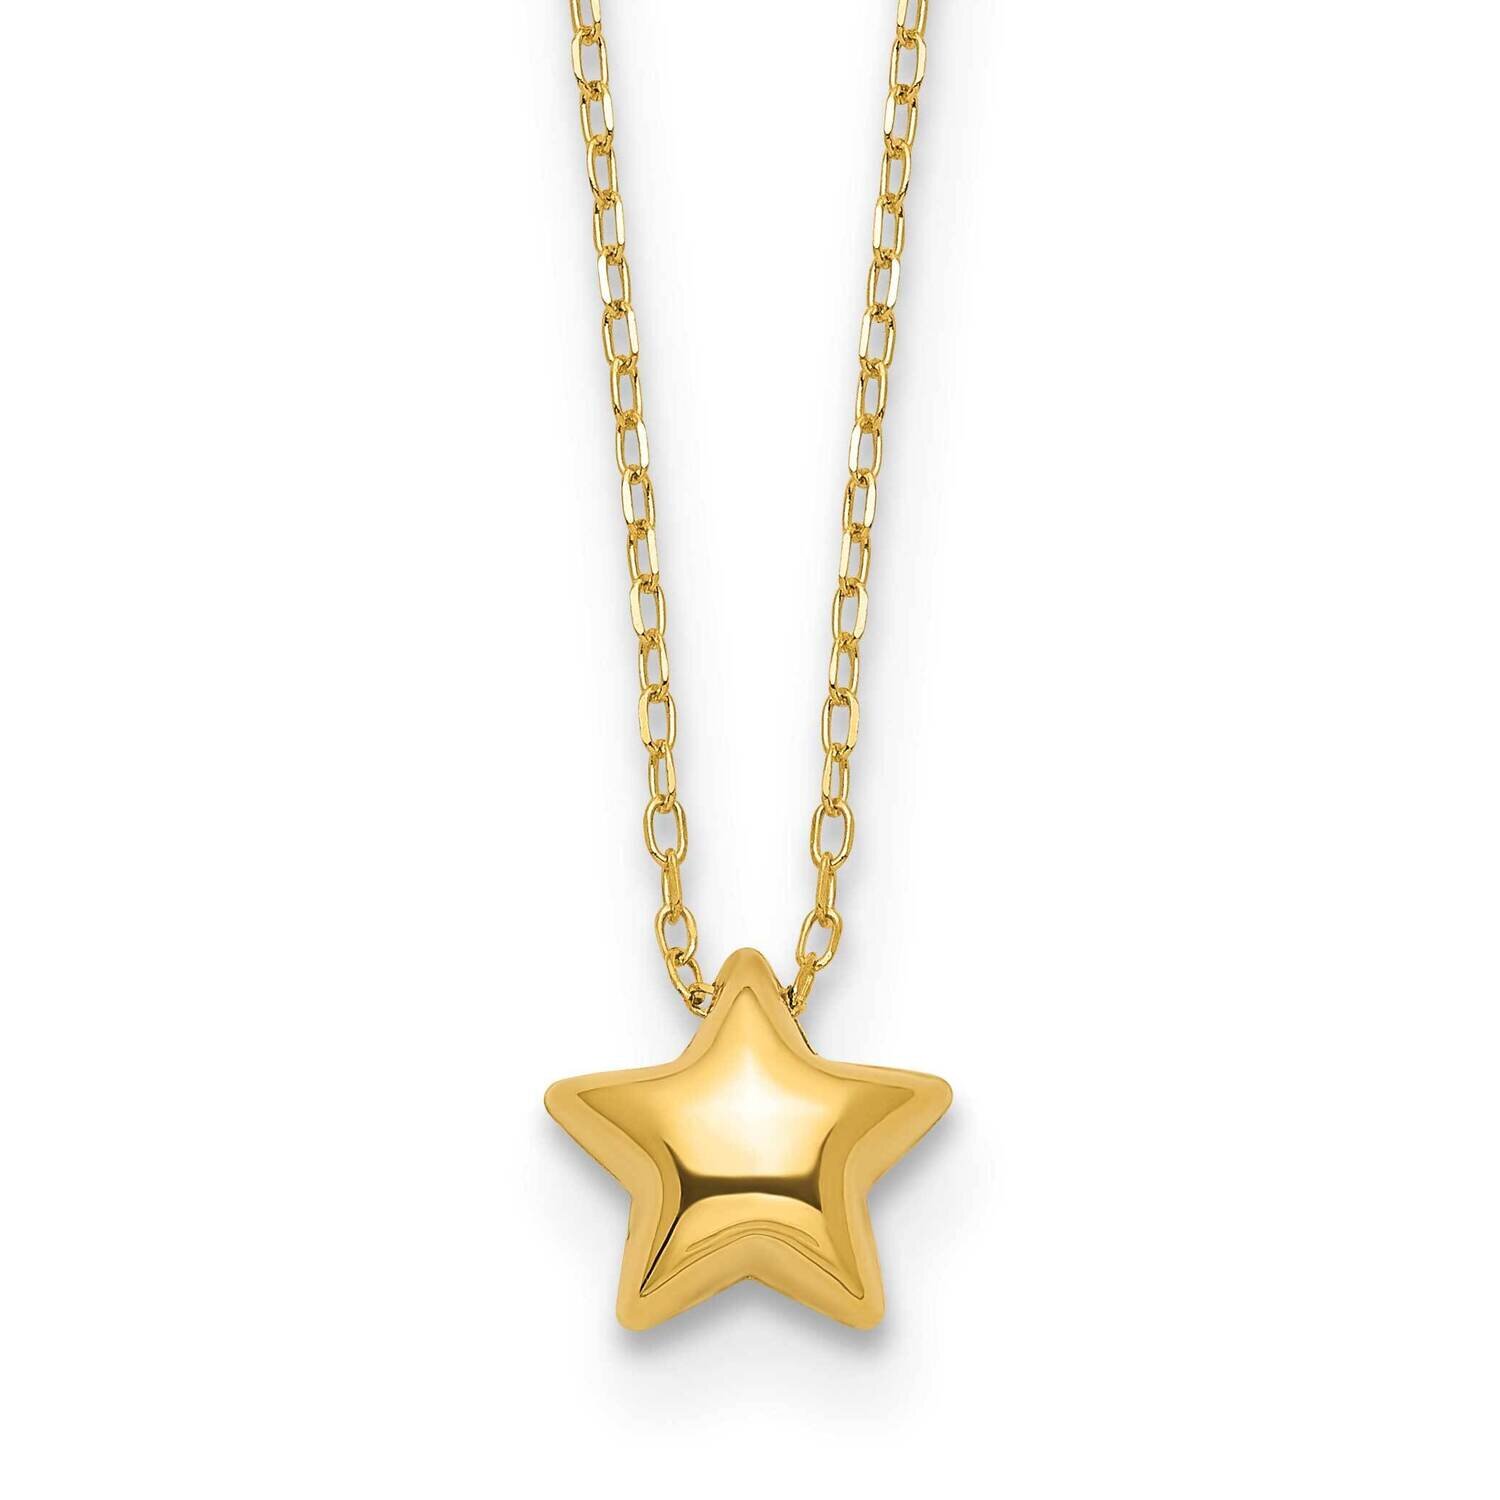 Puffed Star 16.5 Inch Necklace 14k Gold Polished SF2898-16.5